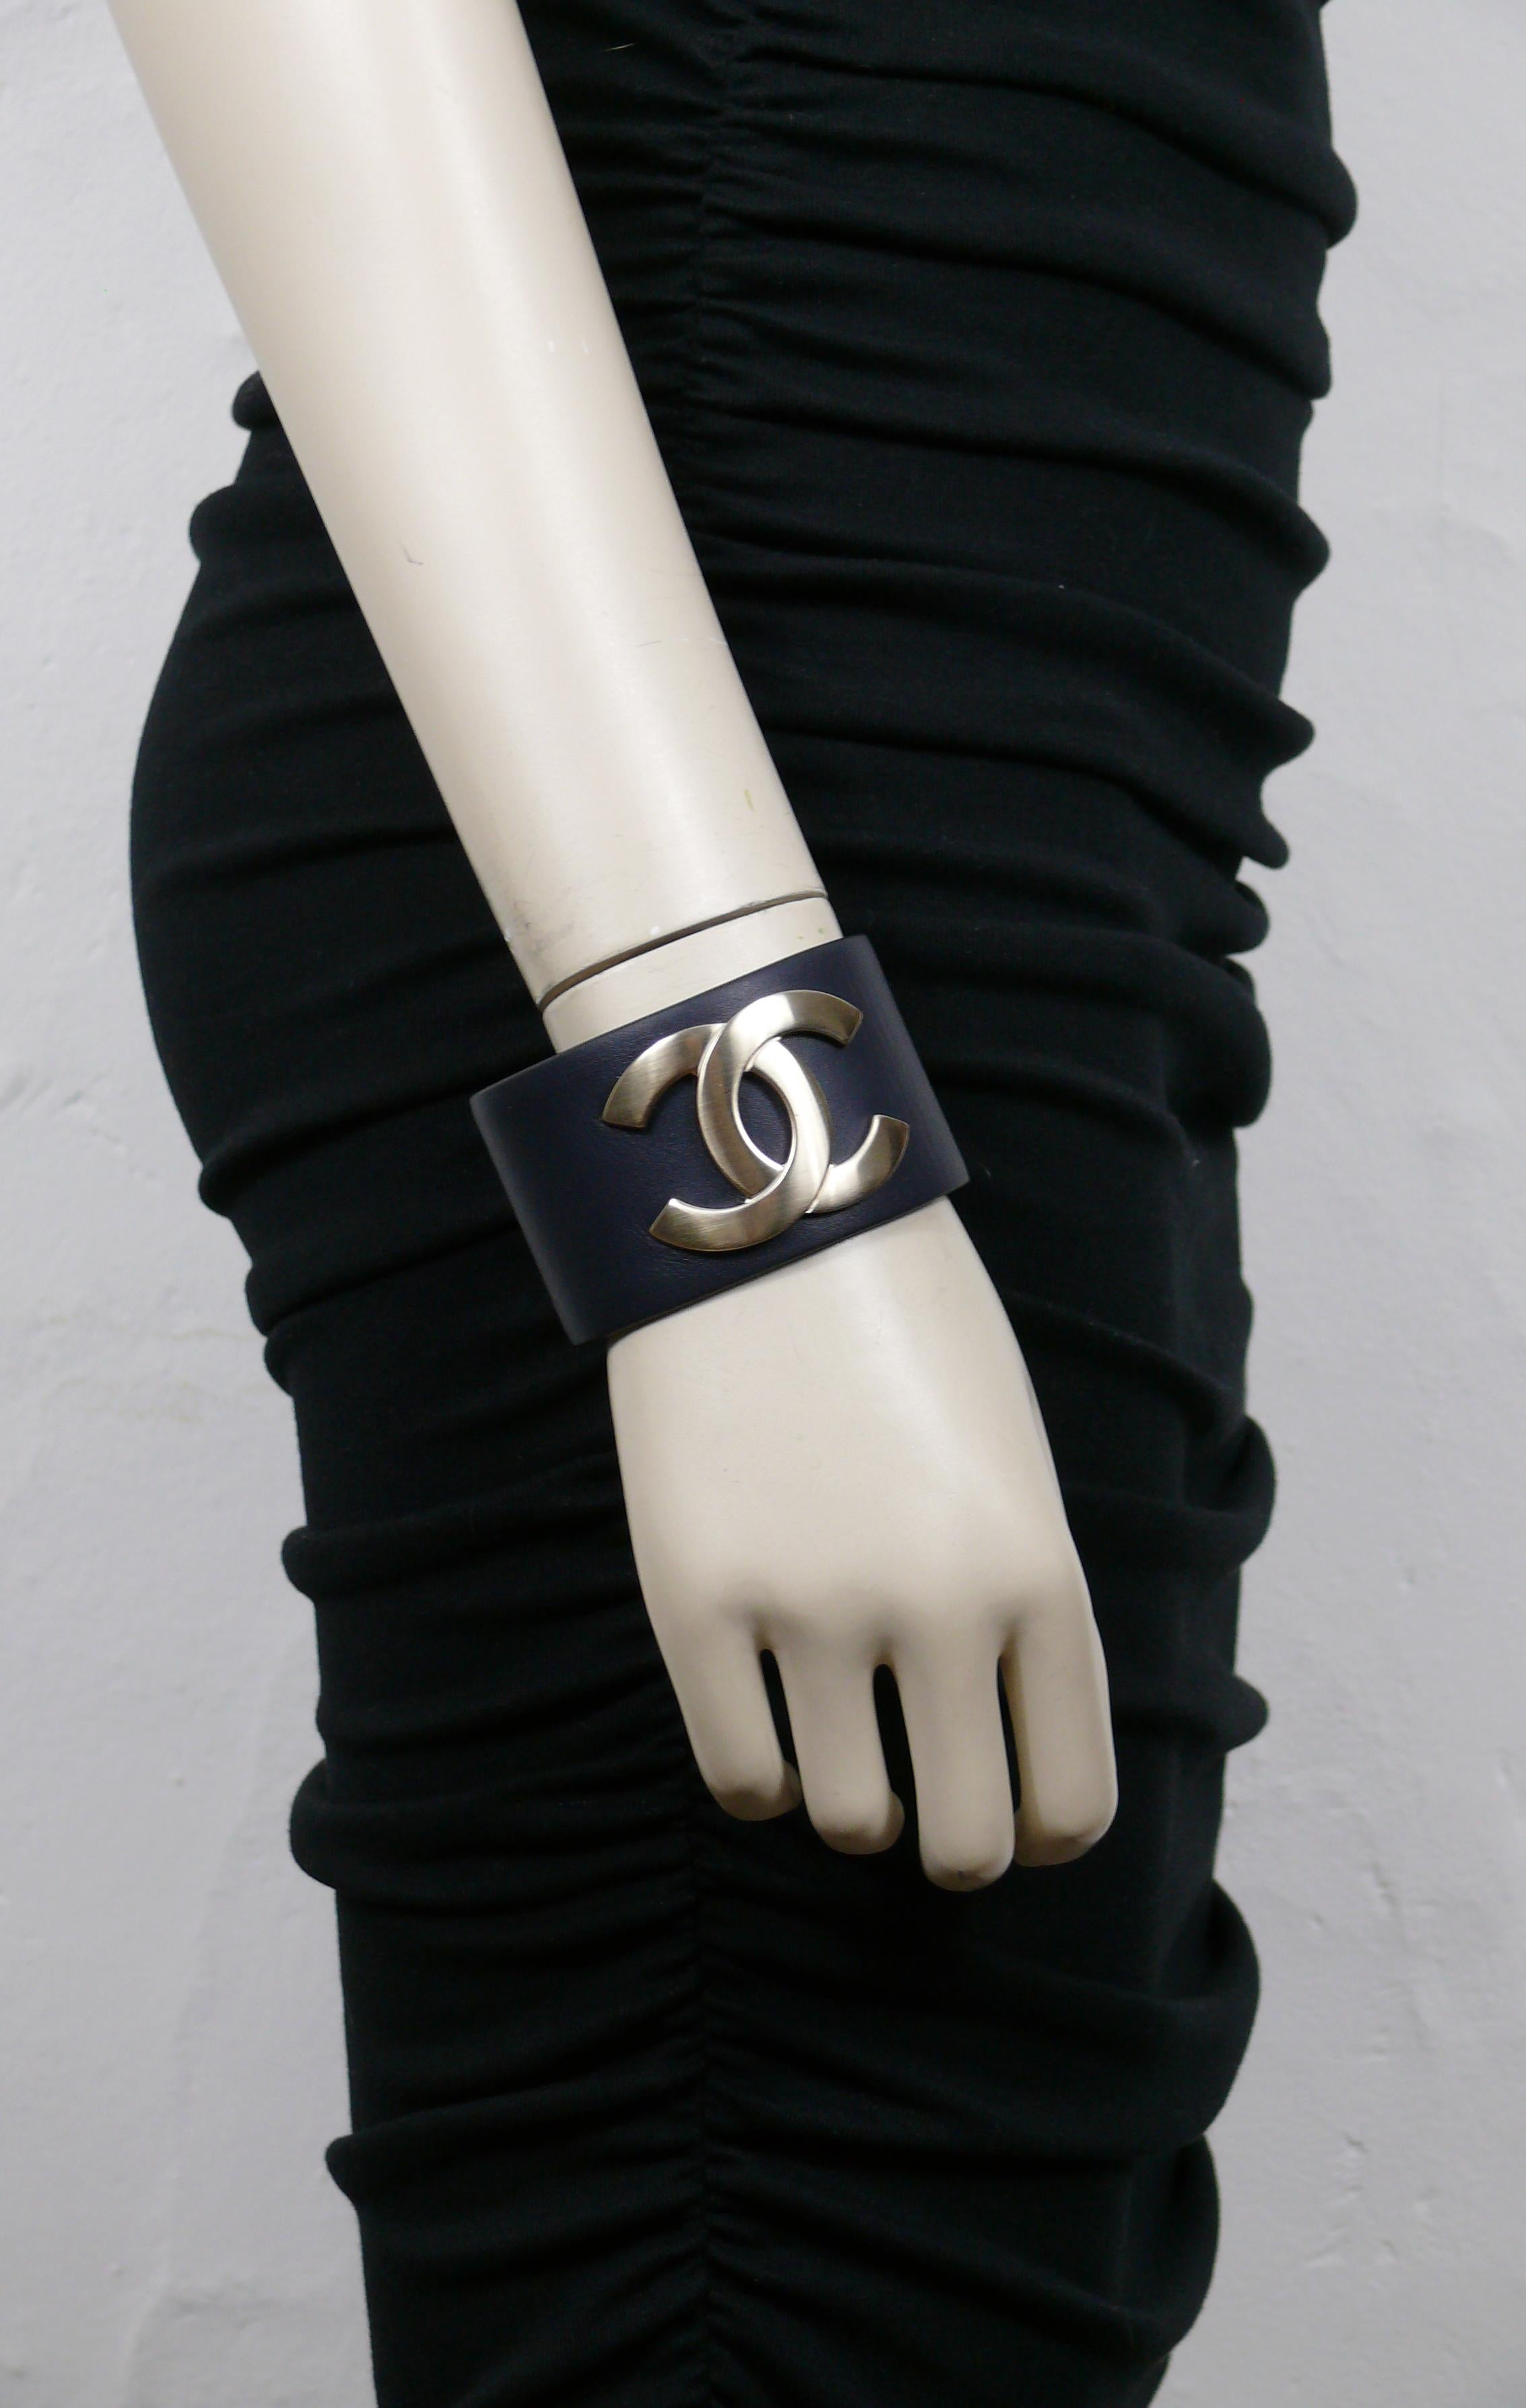 ****** IMPORTANT INFORMATION ******
Please note that the true color of this cuff is DARK NAVY BLUE - NOT black !

CHANEL dark navy blue wide leather cuff bracelet featuring a pale gold tone CC logo at the centre.

Exclusive Edition December